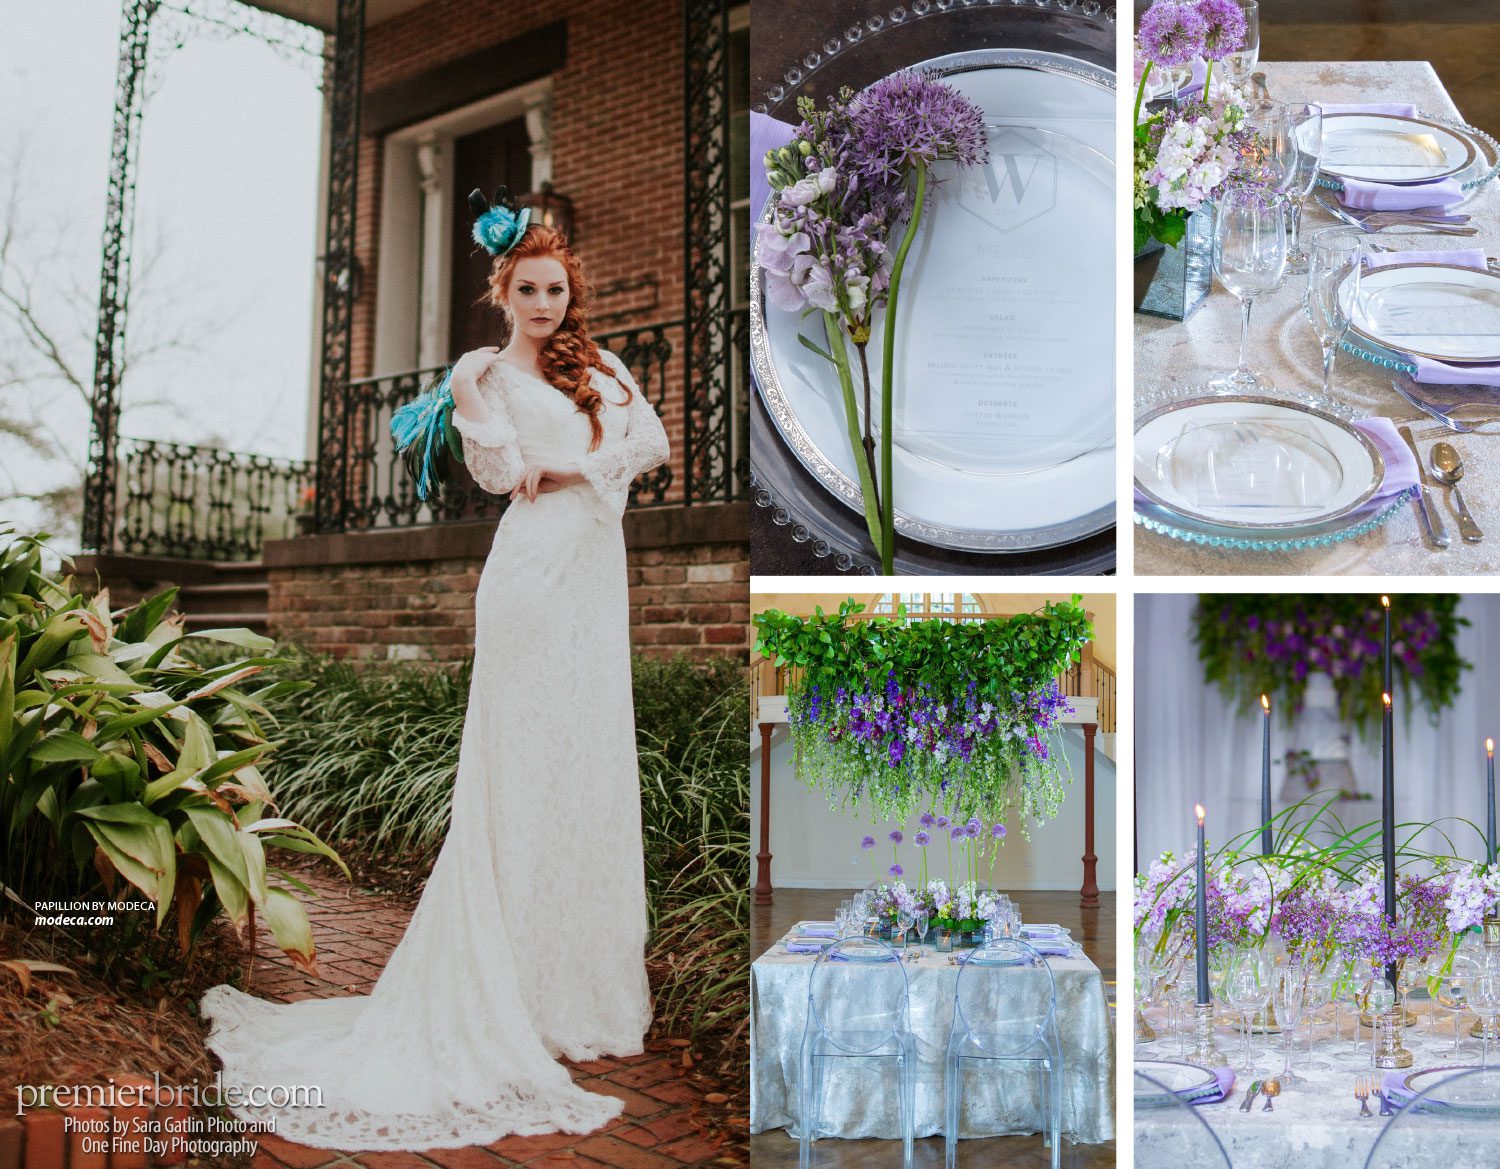 Pavilion by Modeca, photos by Sara Gatlin Photo and One Fine Day Photography